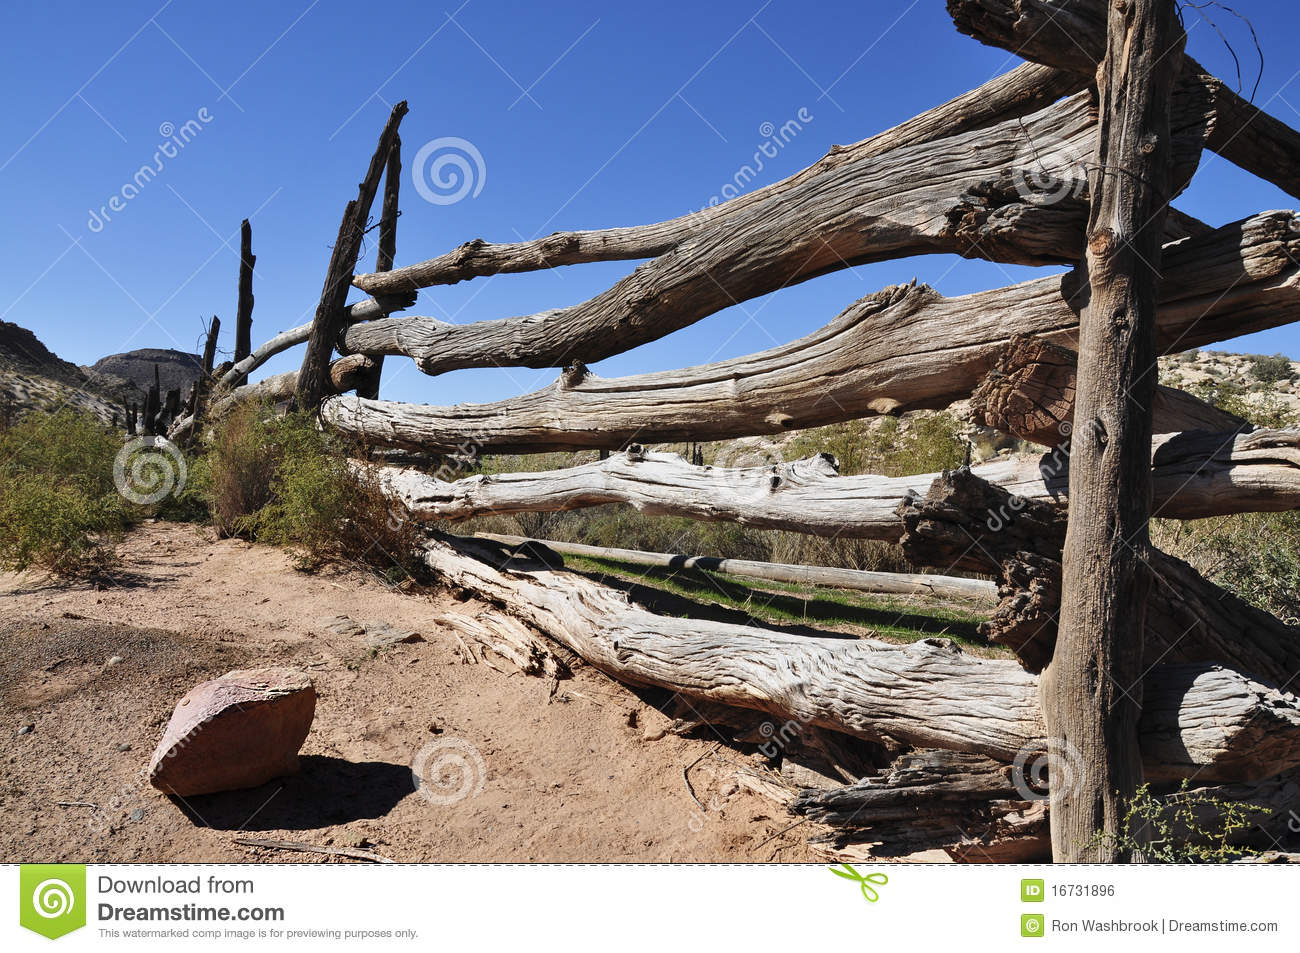 Tired Old Fence Royalty Free Stock Image   Image  16731896